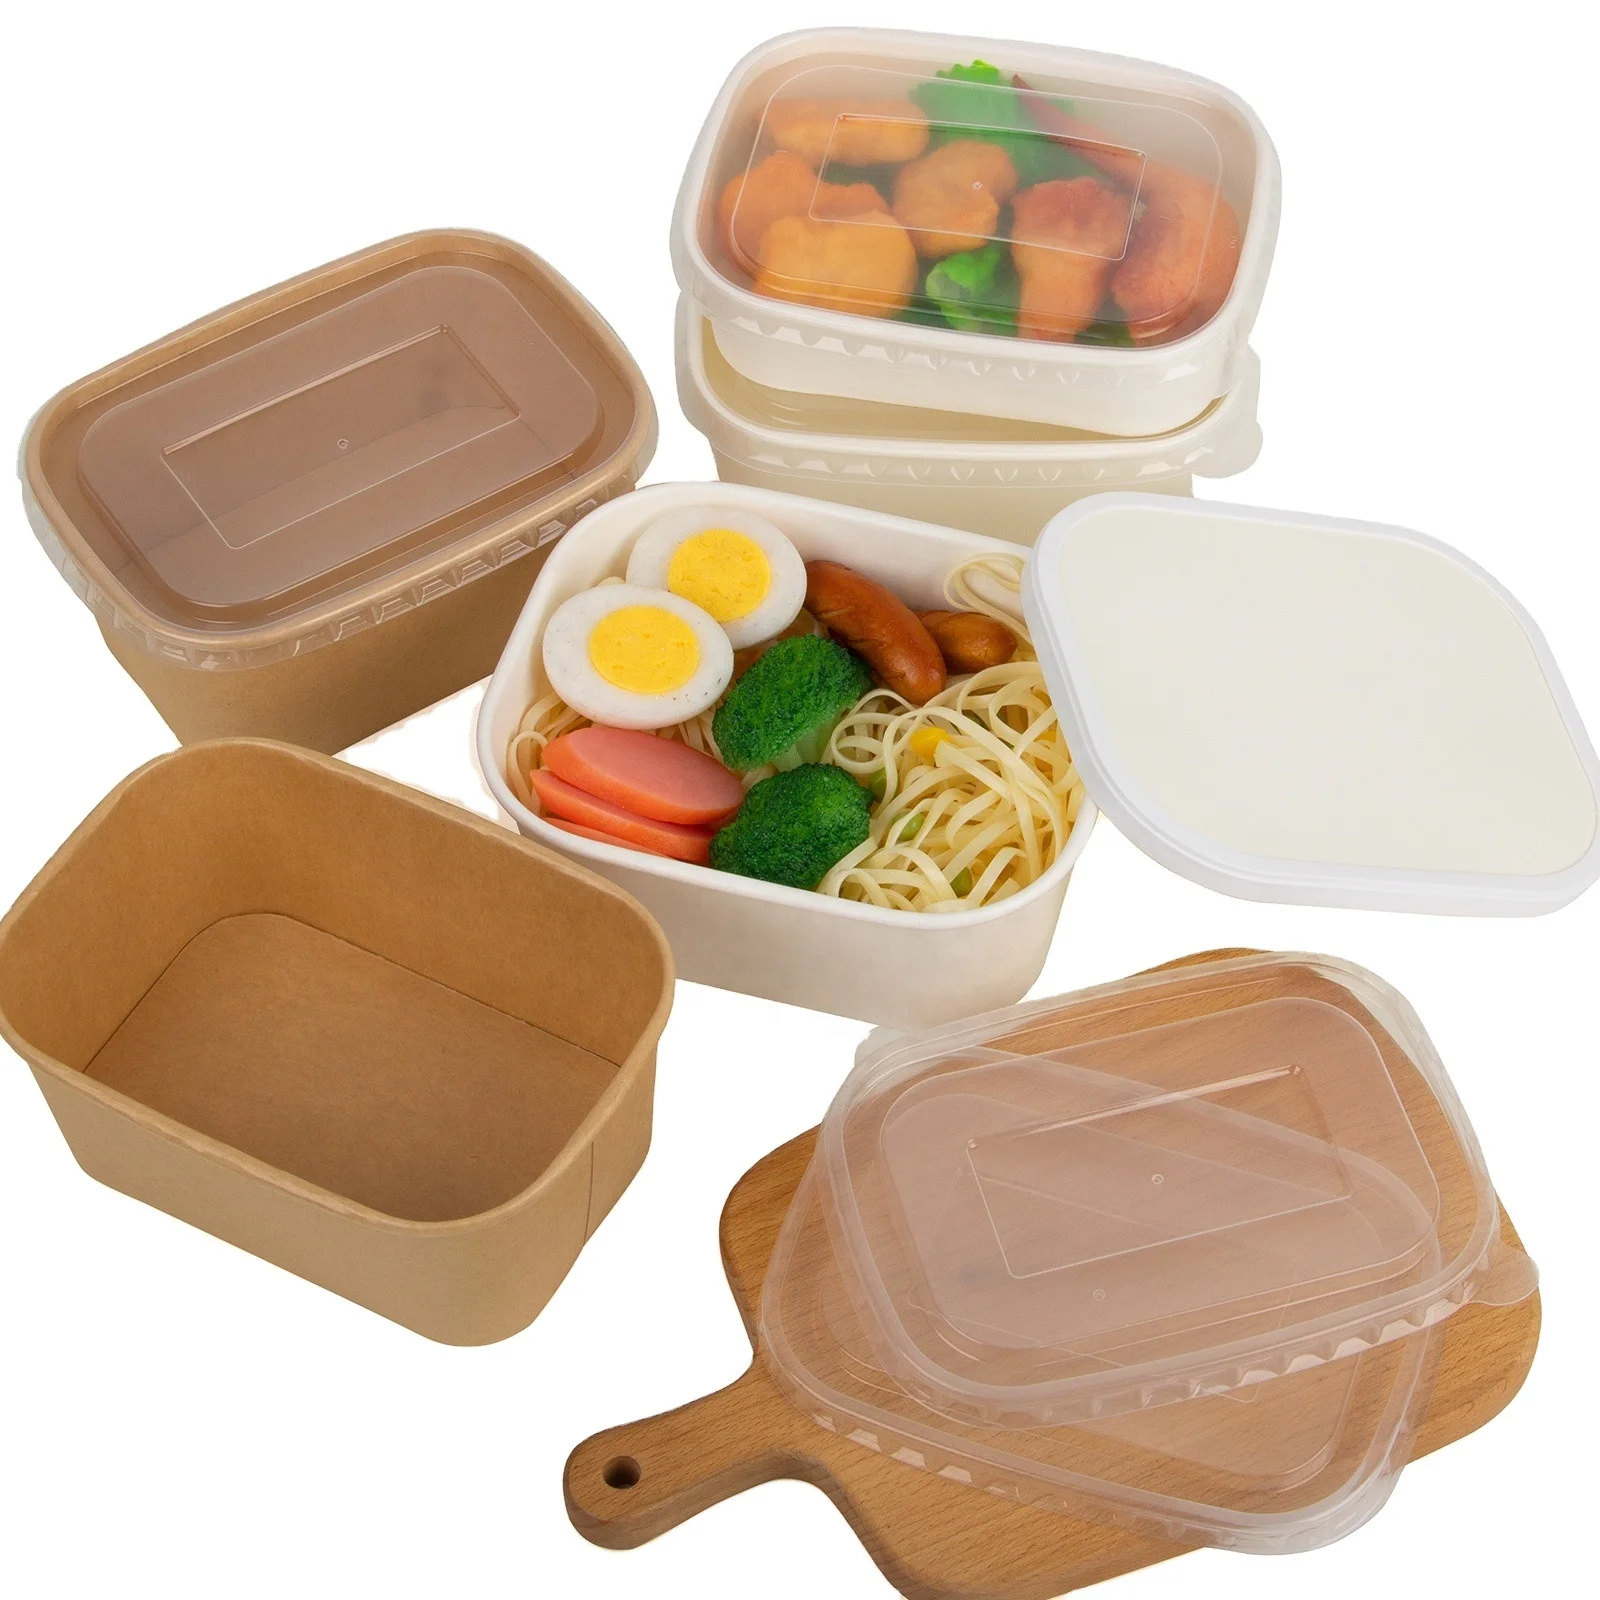 Disposable Biodegradable Rectangle Takeaway Salad Bowl Food Kraft Paper  Lunch Boxes with Lid - China Square Rectangular Salad Bowls and Food  Rectangle Bowl price